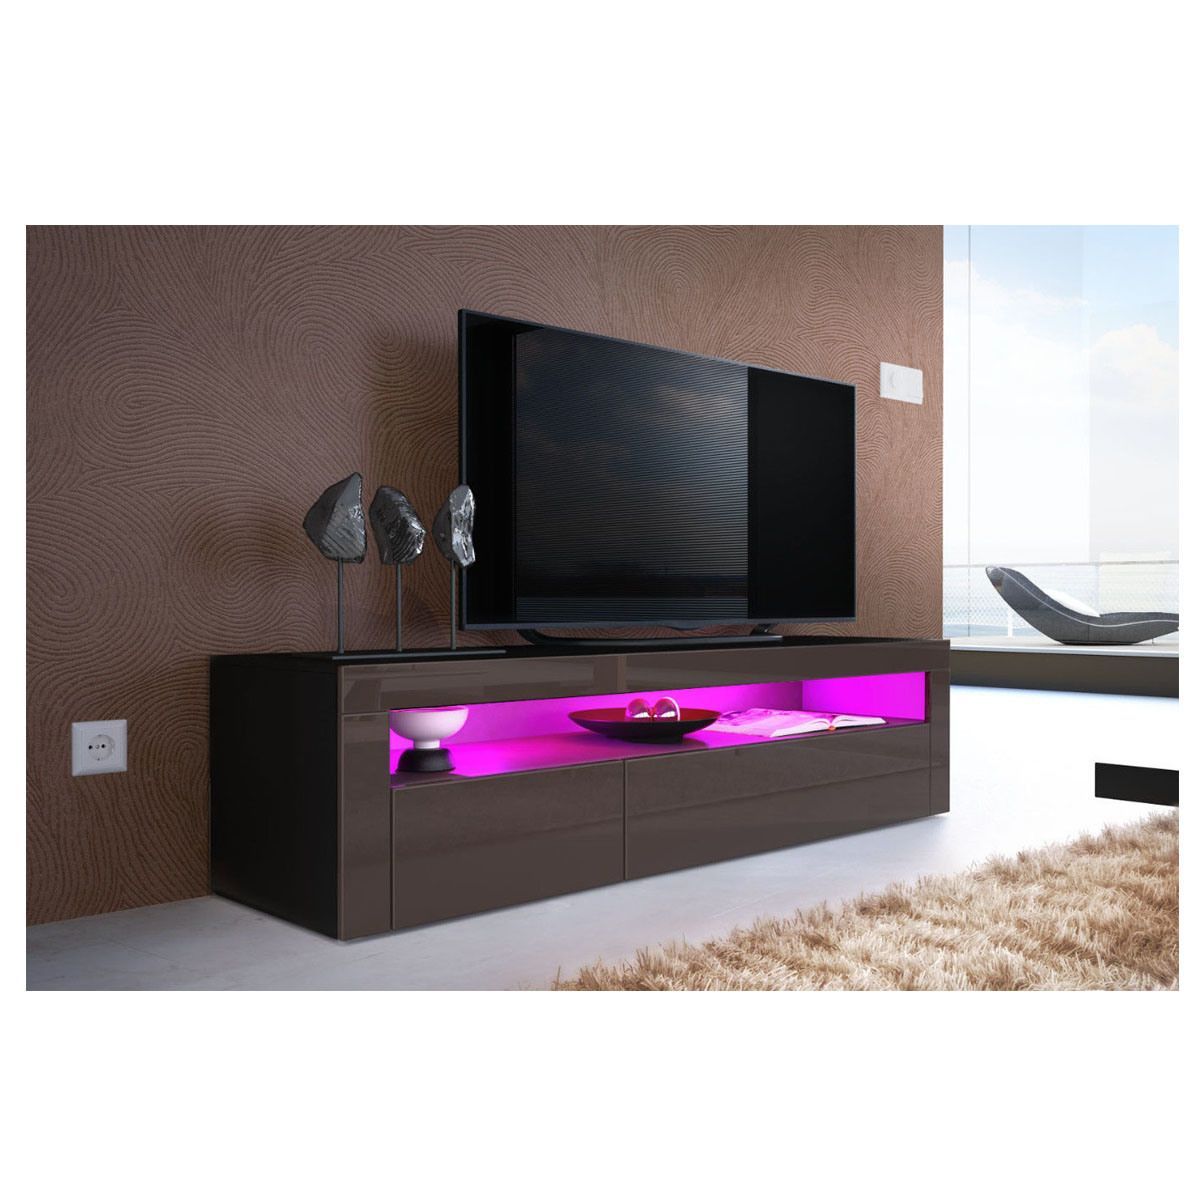 China High Gloss Uv Black Led Light Sideboard Tv Unit In Polar Led Tv Stands (View 13 of 20)